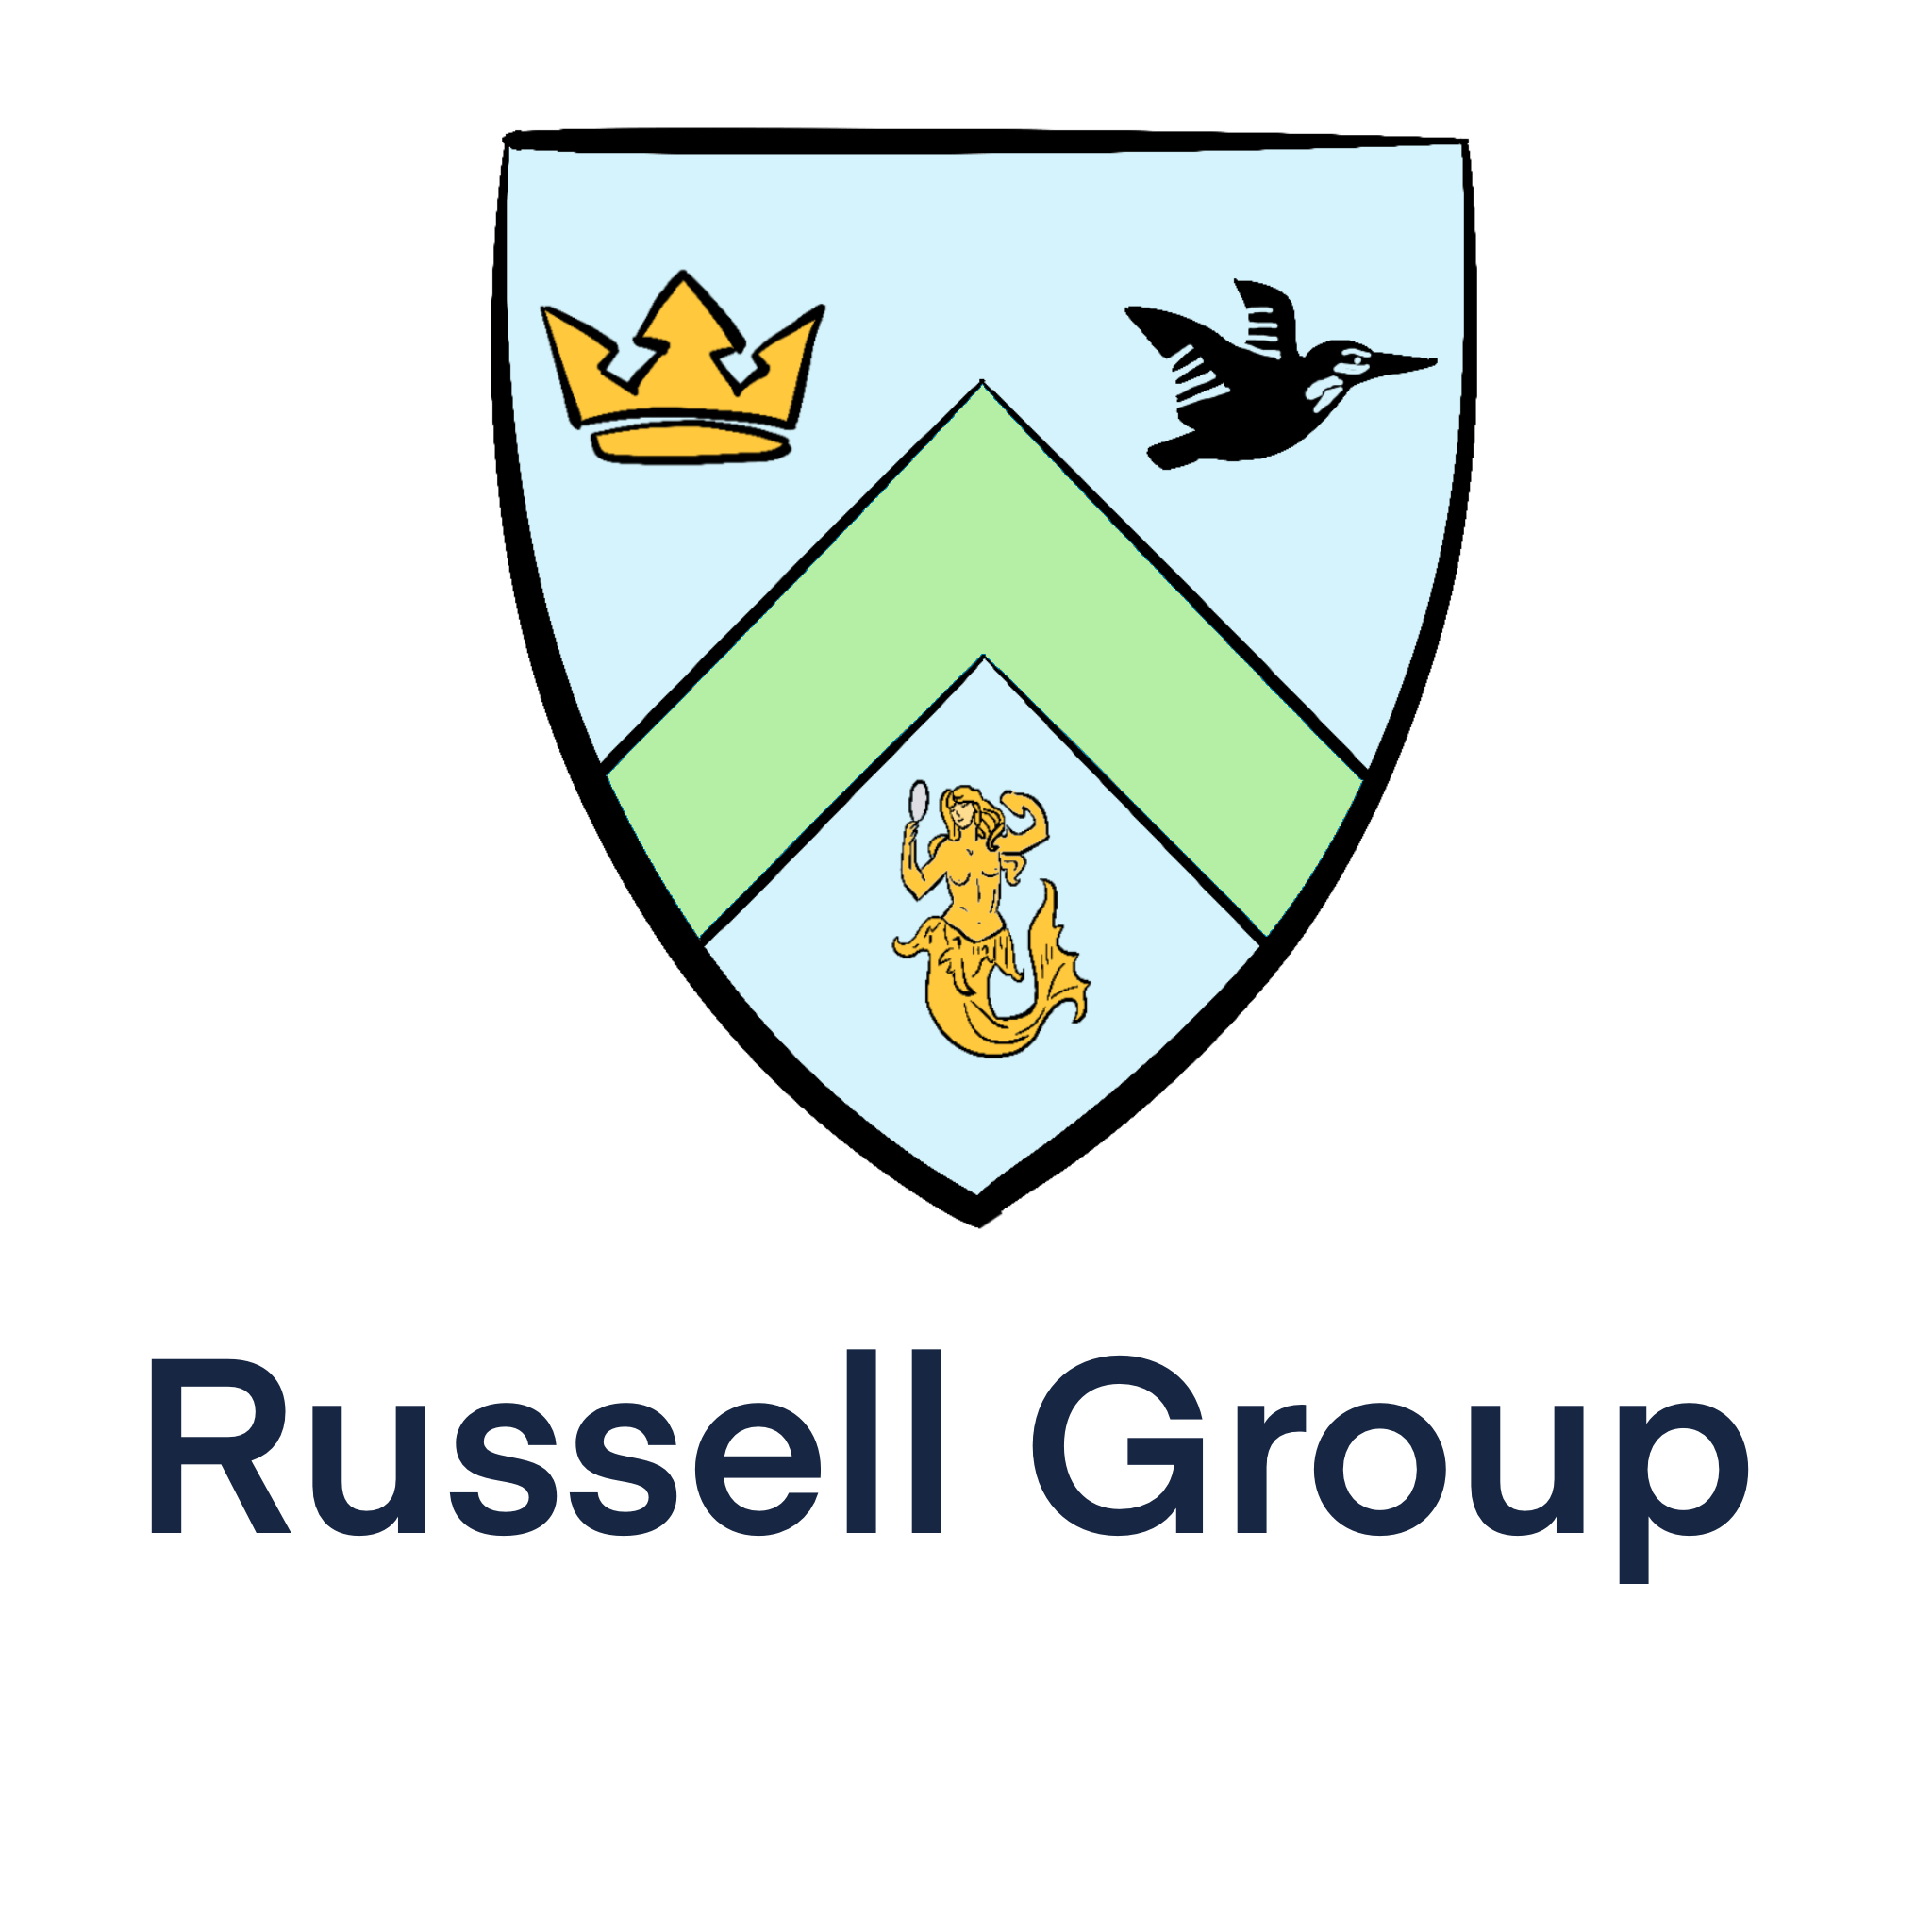 Carl holds a degree from a Russell Group University